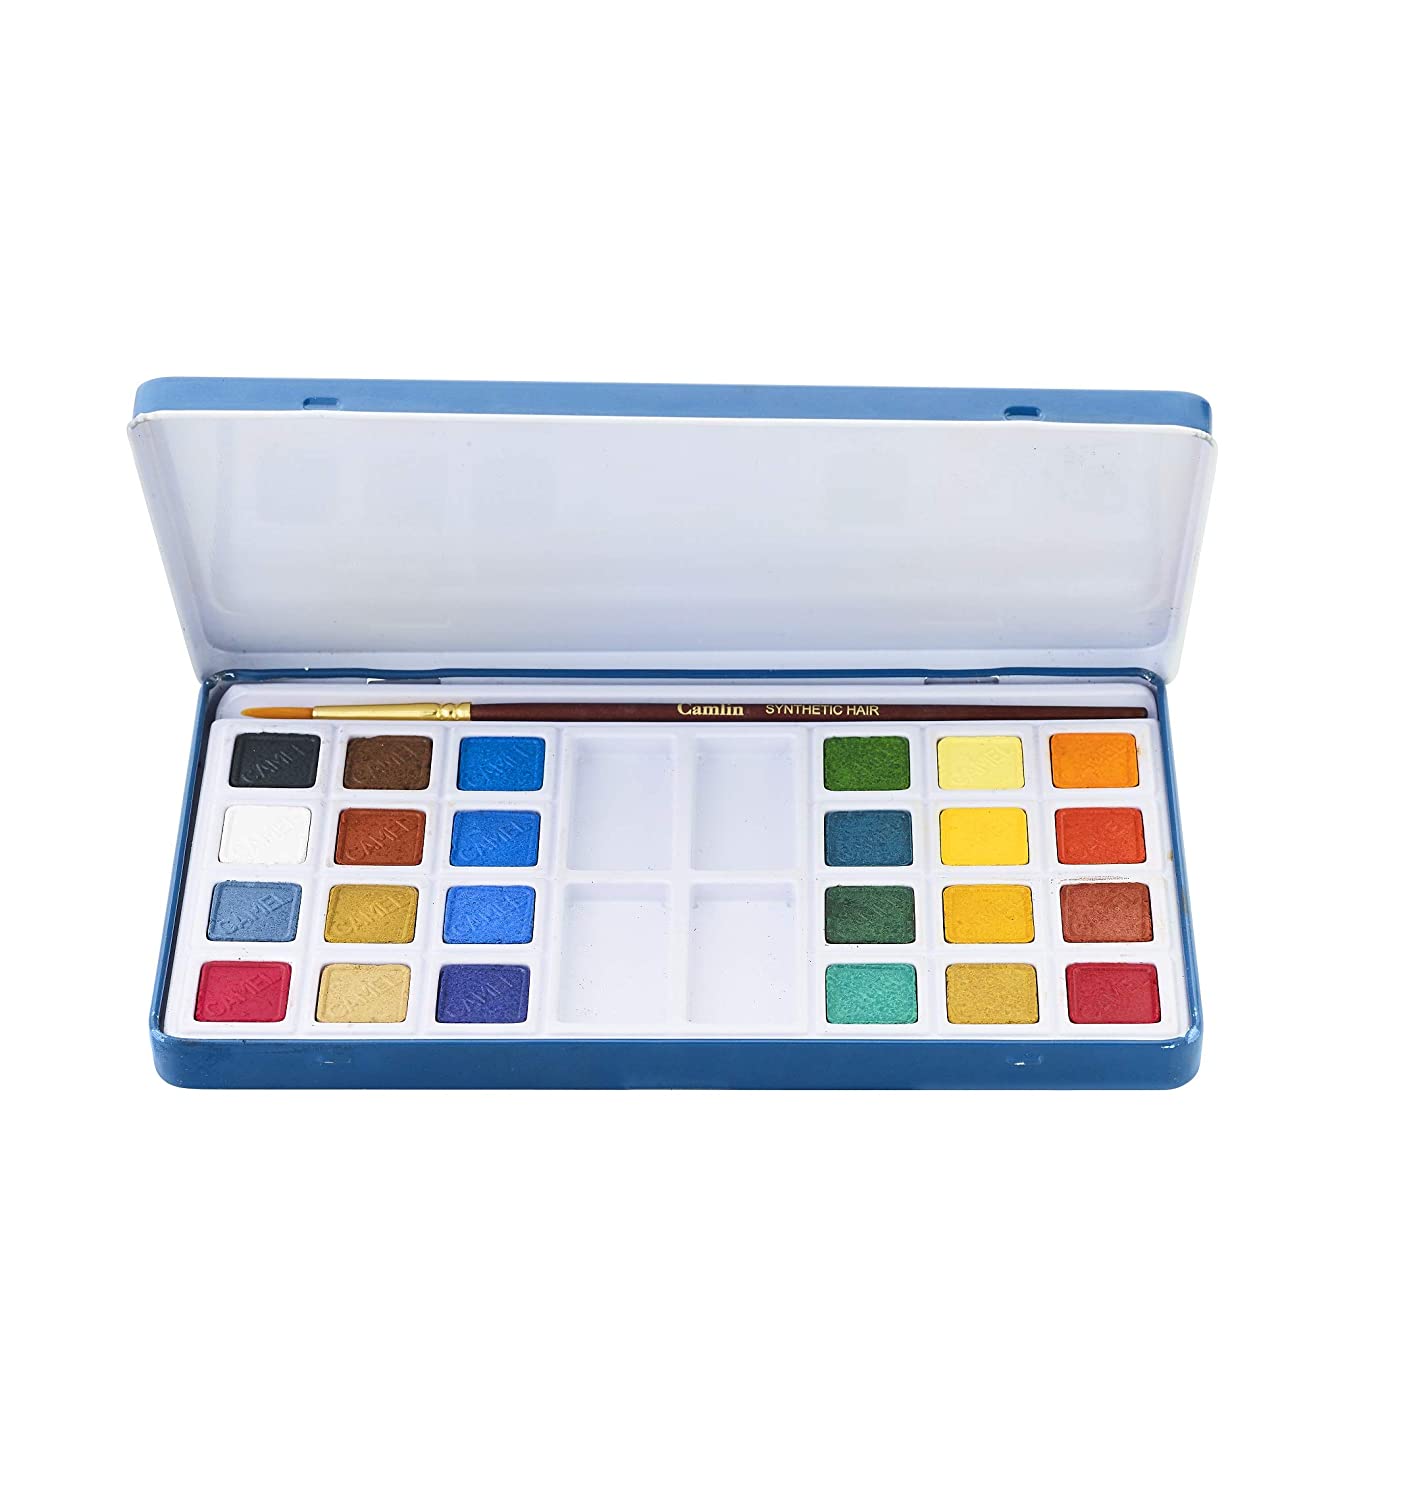 Buy Bianyo Artist Watercolor Cakes Set Art Painting Kit With Watercolor  Paper, 36 Colors, Multicolor Online at Low Prices in India - Amazon.in